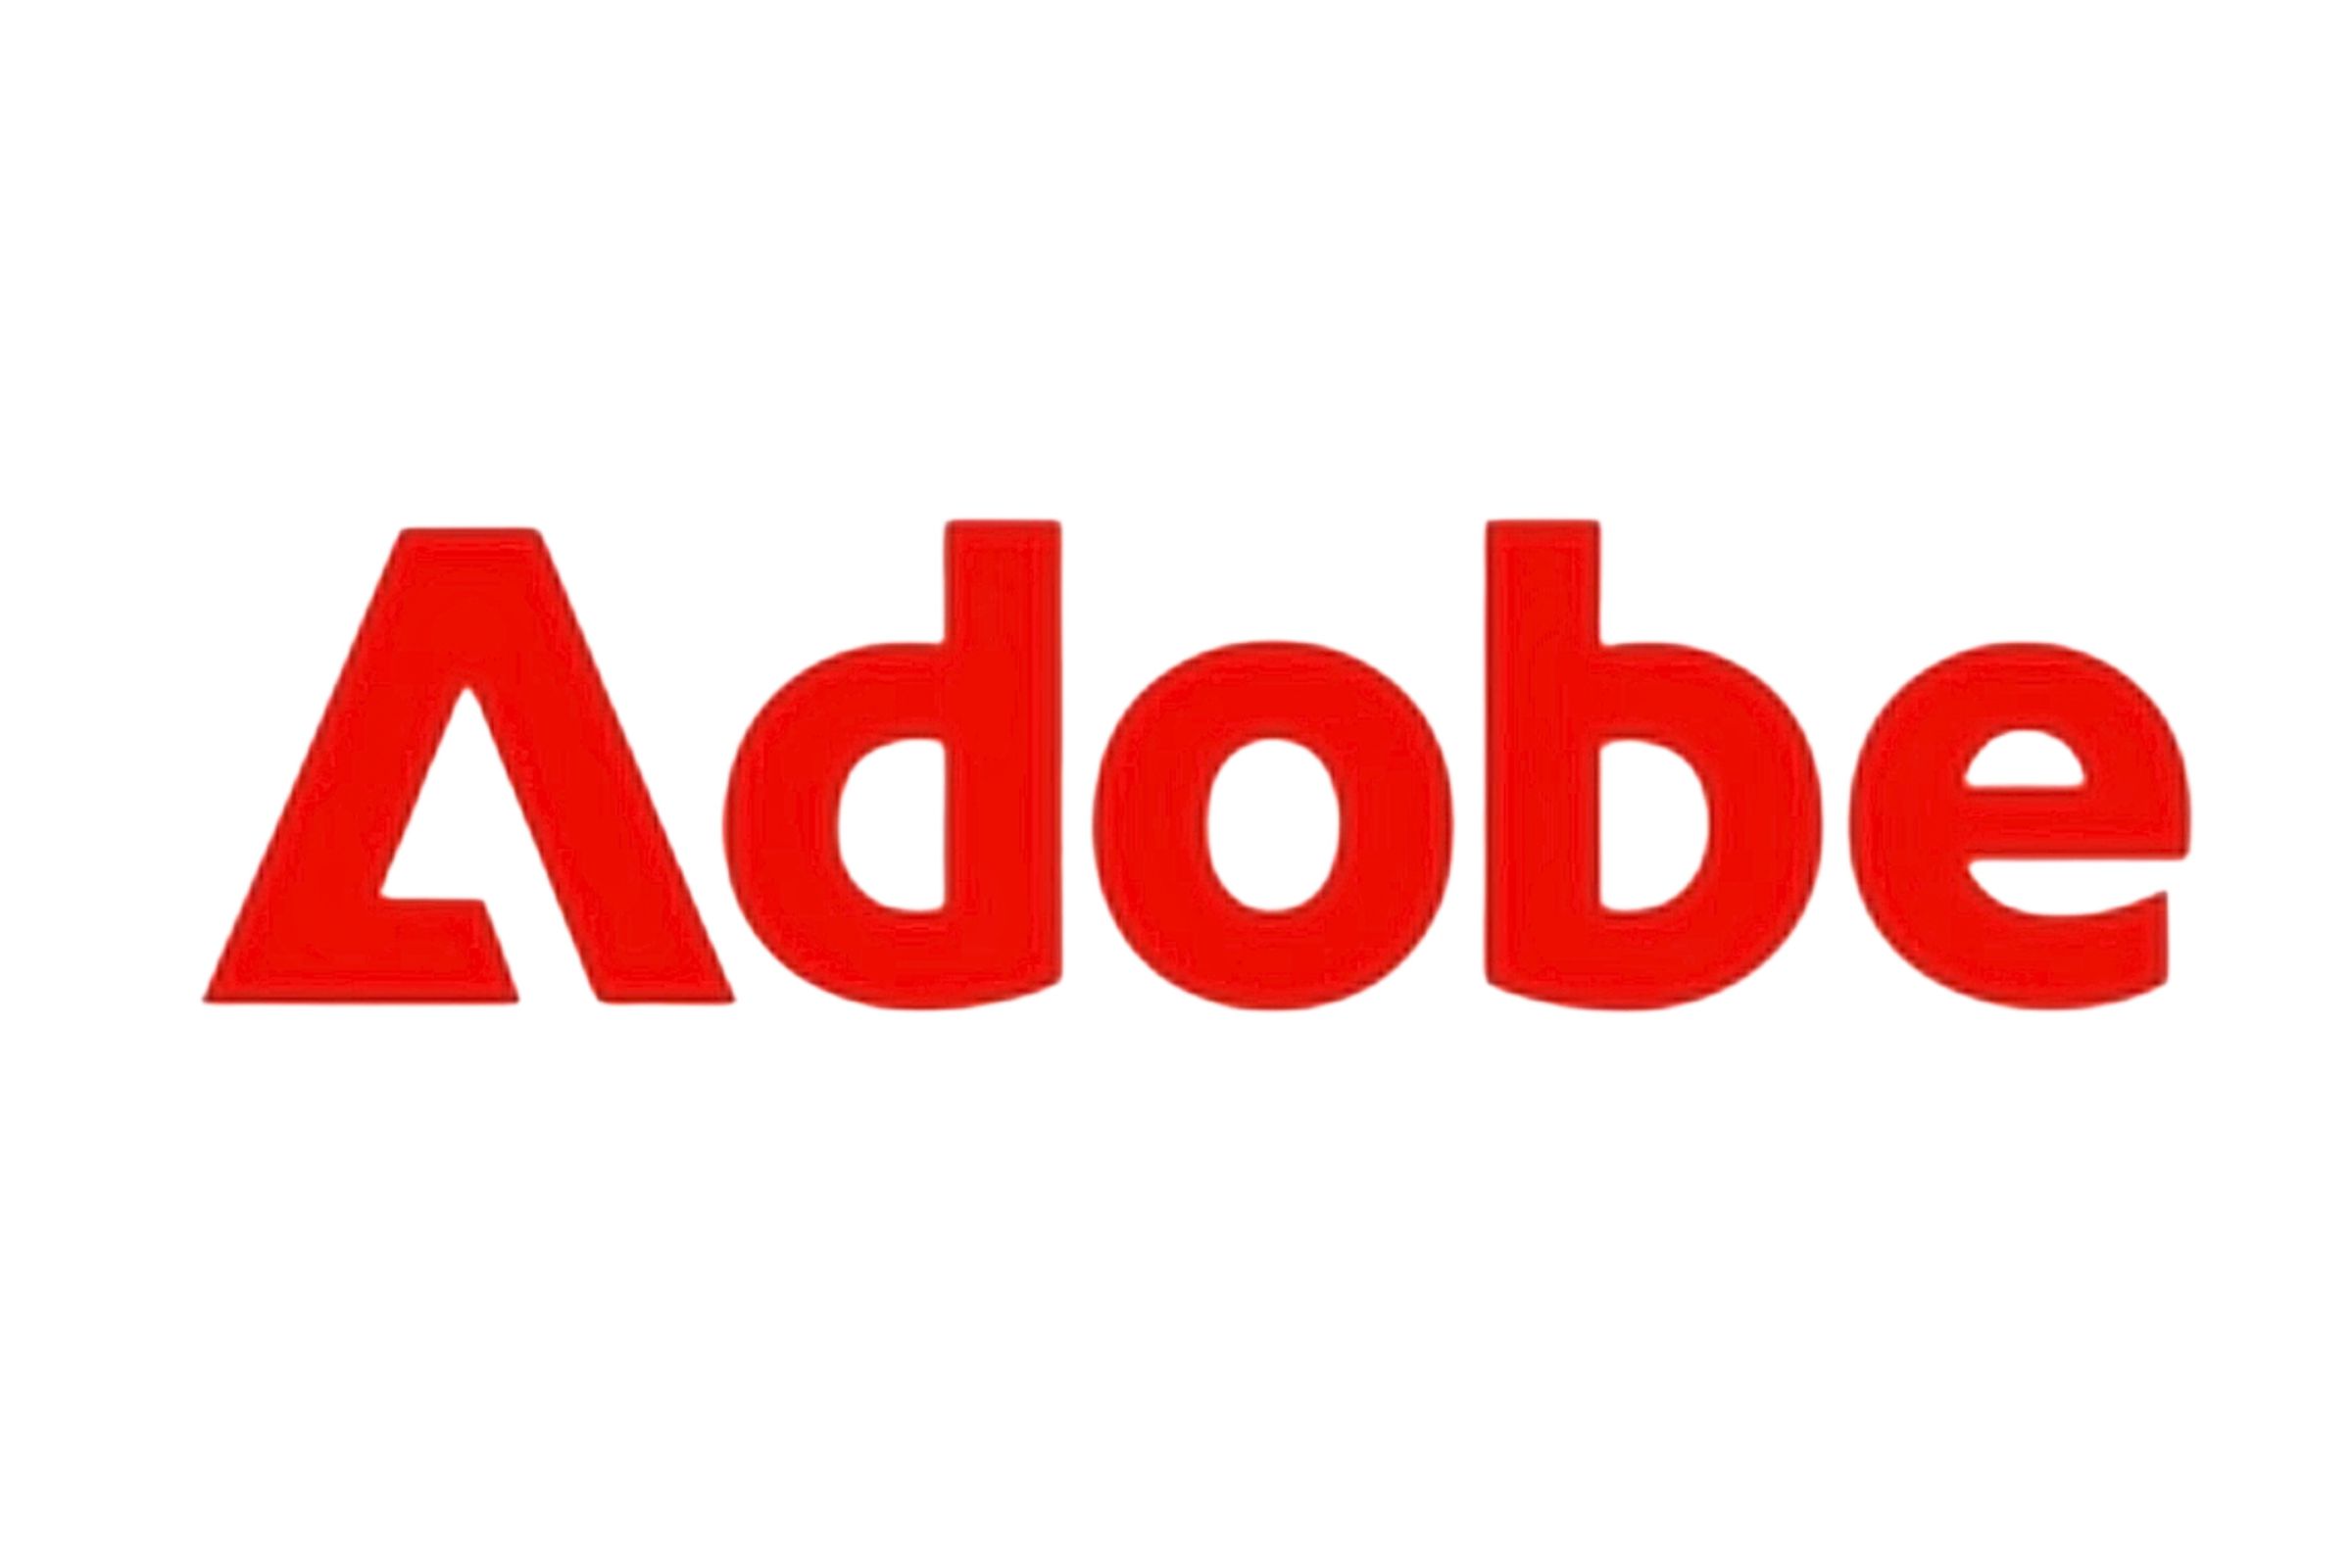 The new Adobe wordmark in red against a white background.